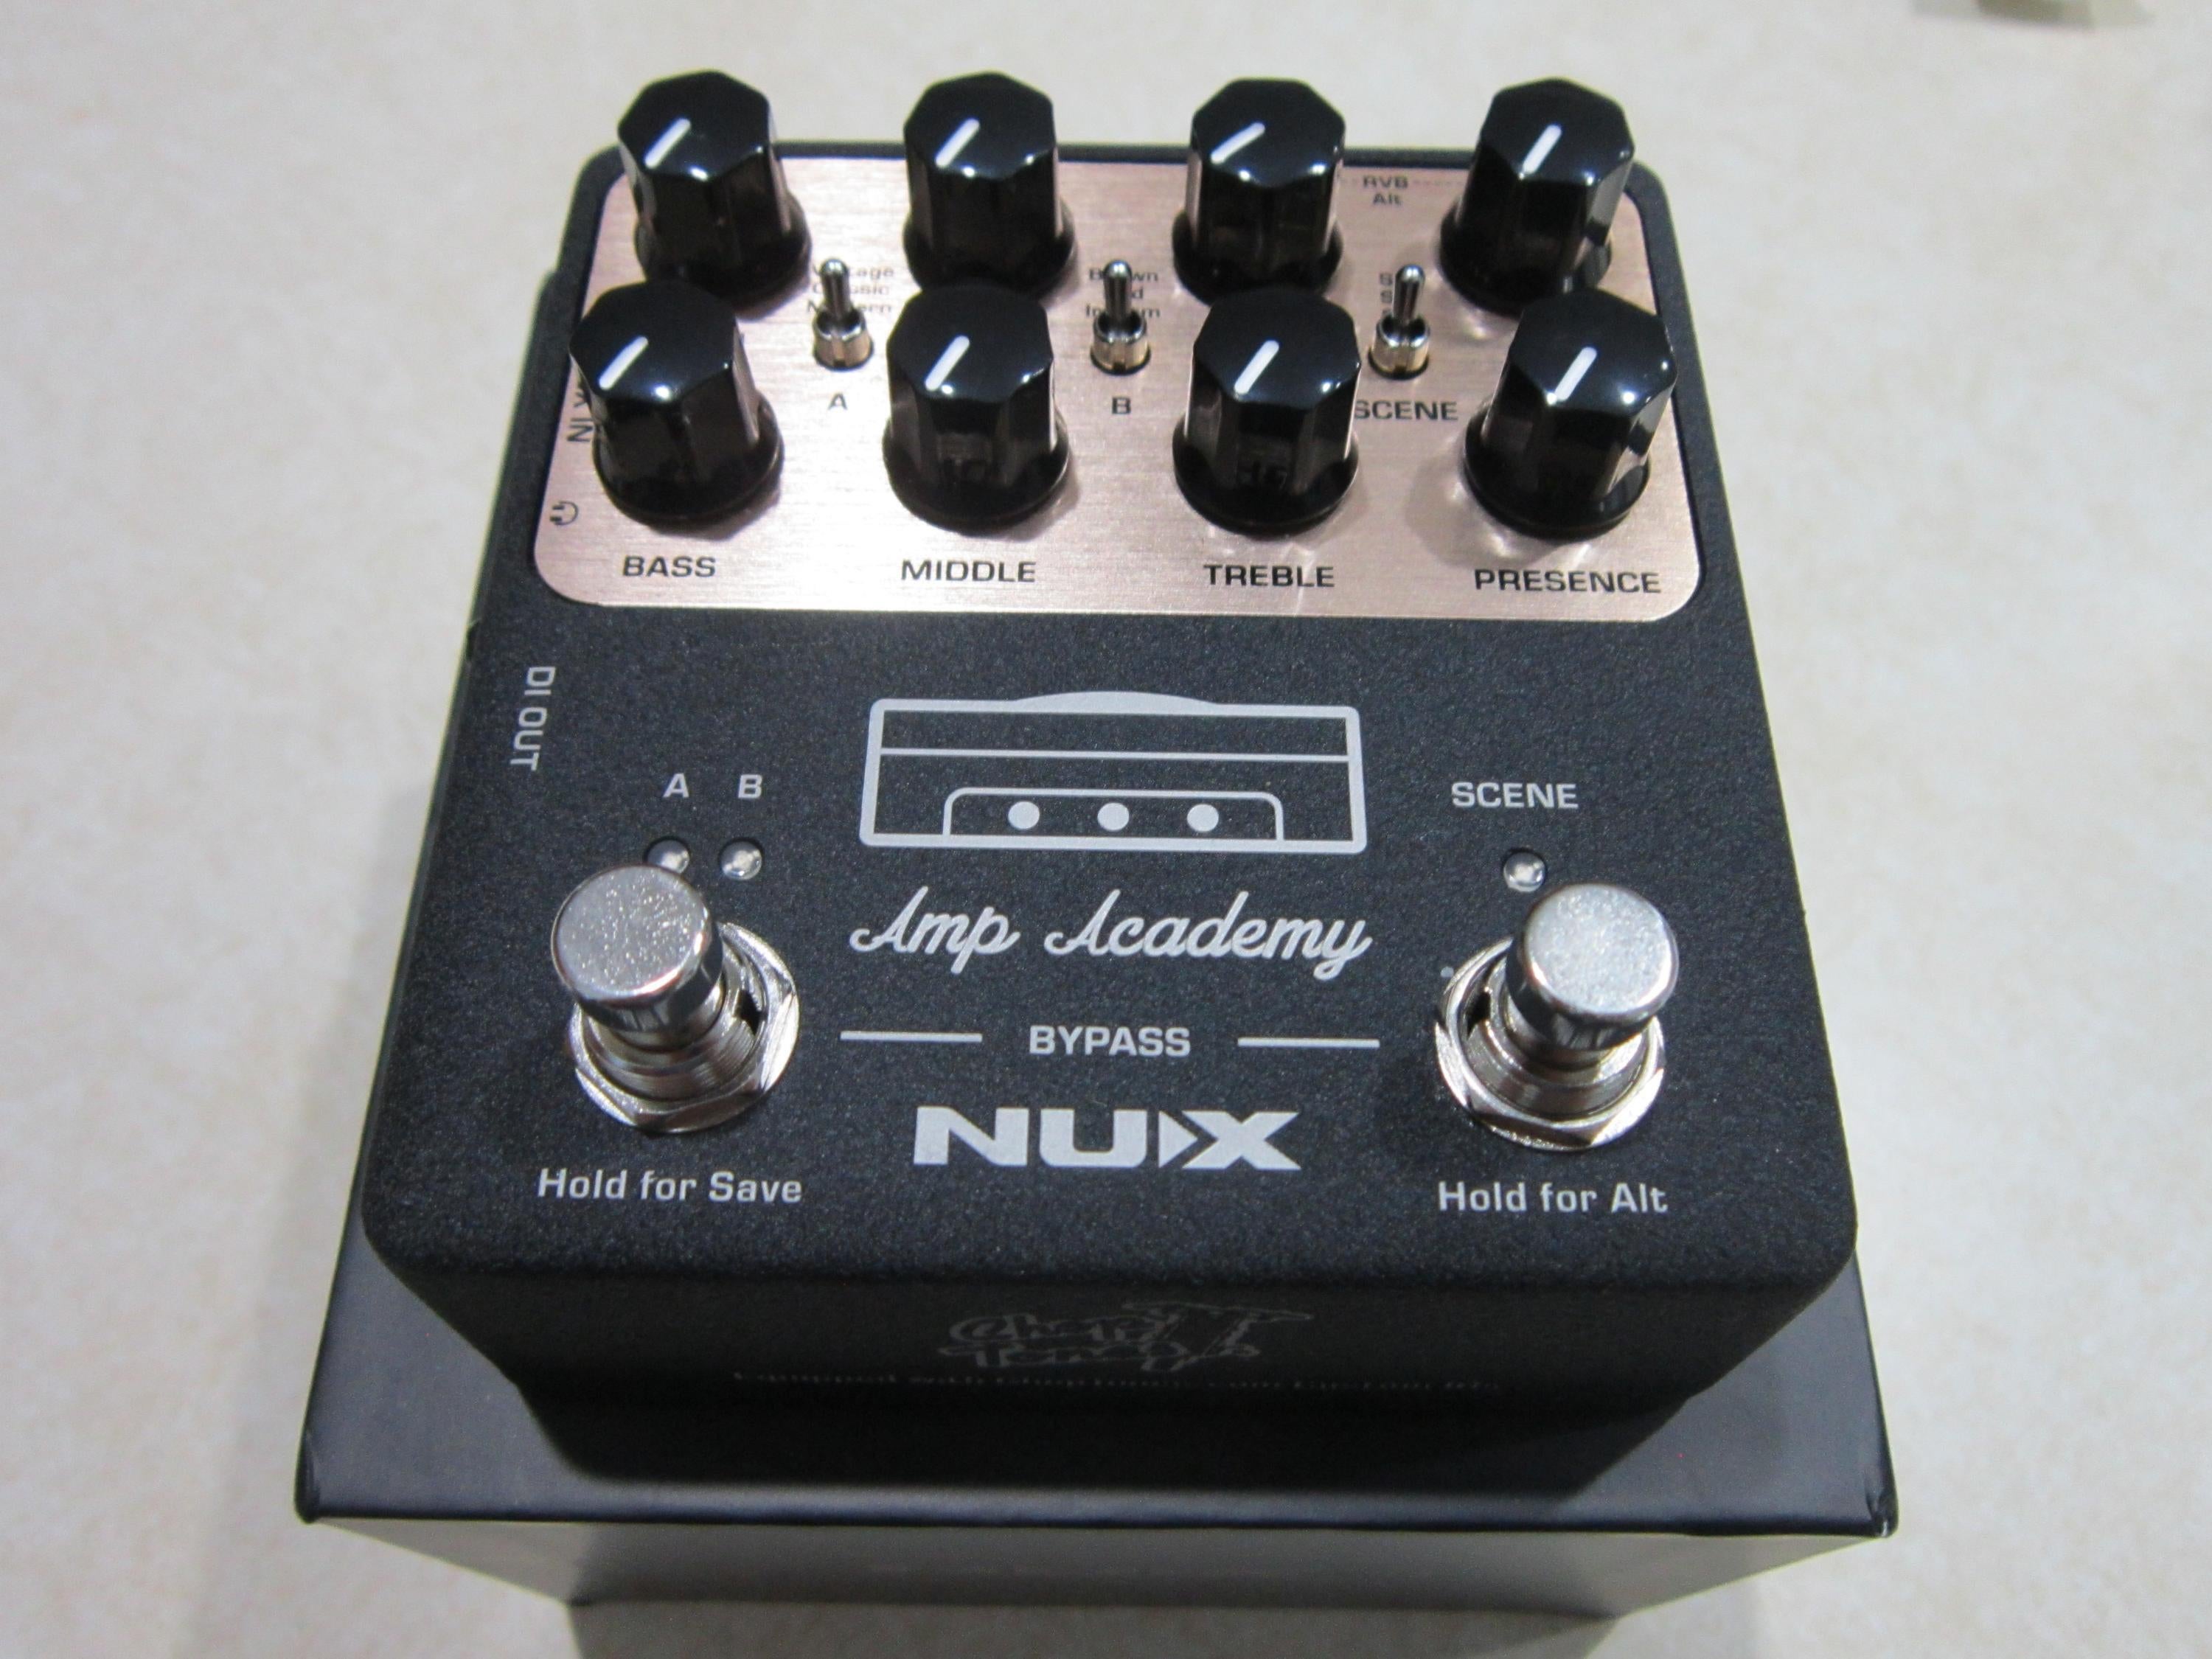 Used NUX Amp Academy - Sweetwater's Gear Exchange